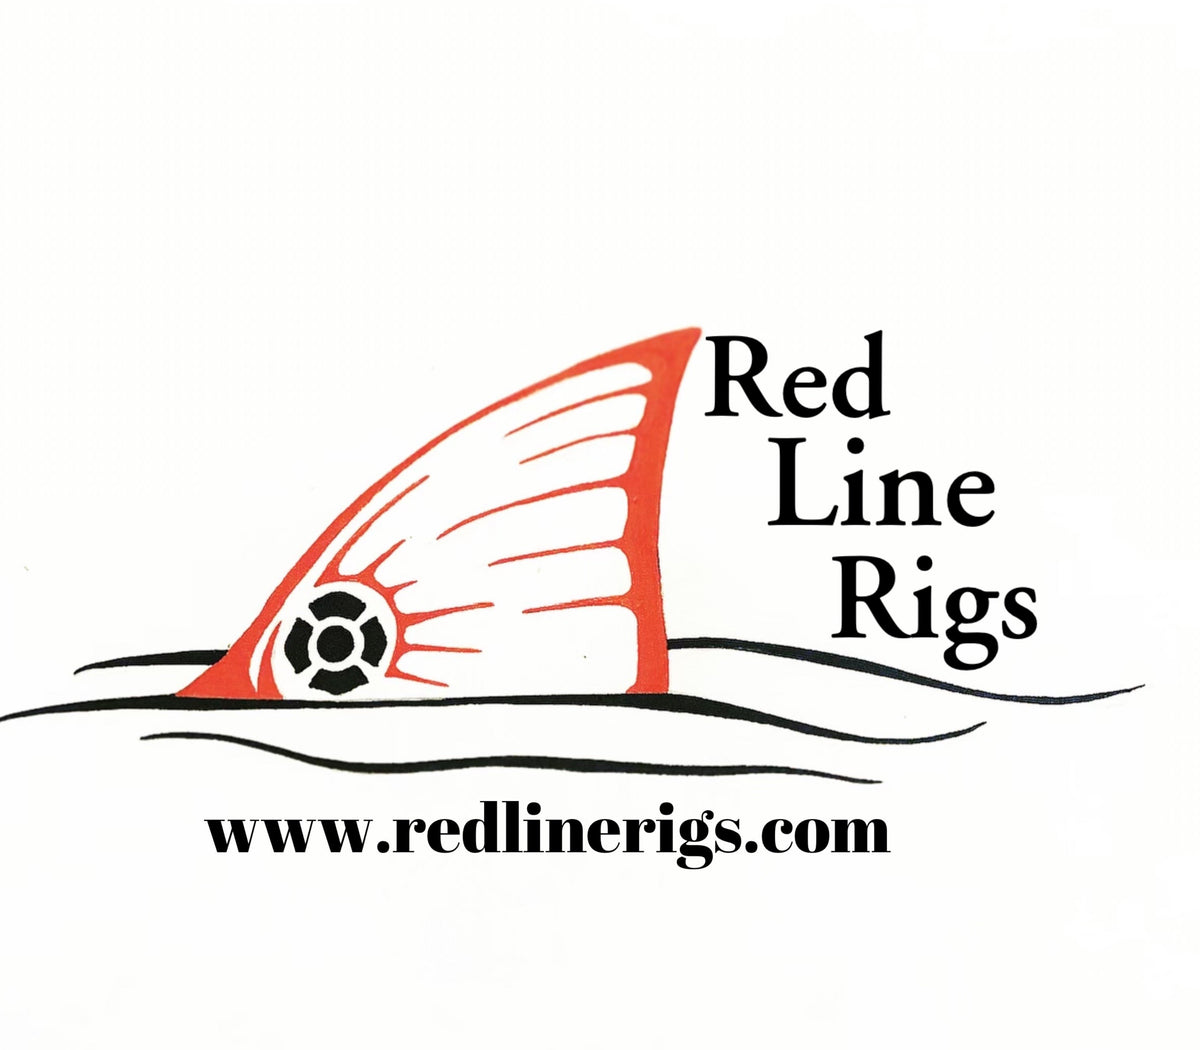 RLR Dealers – Red Line Rigs